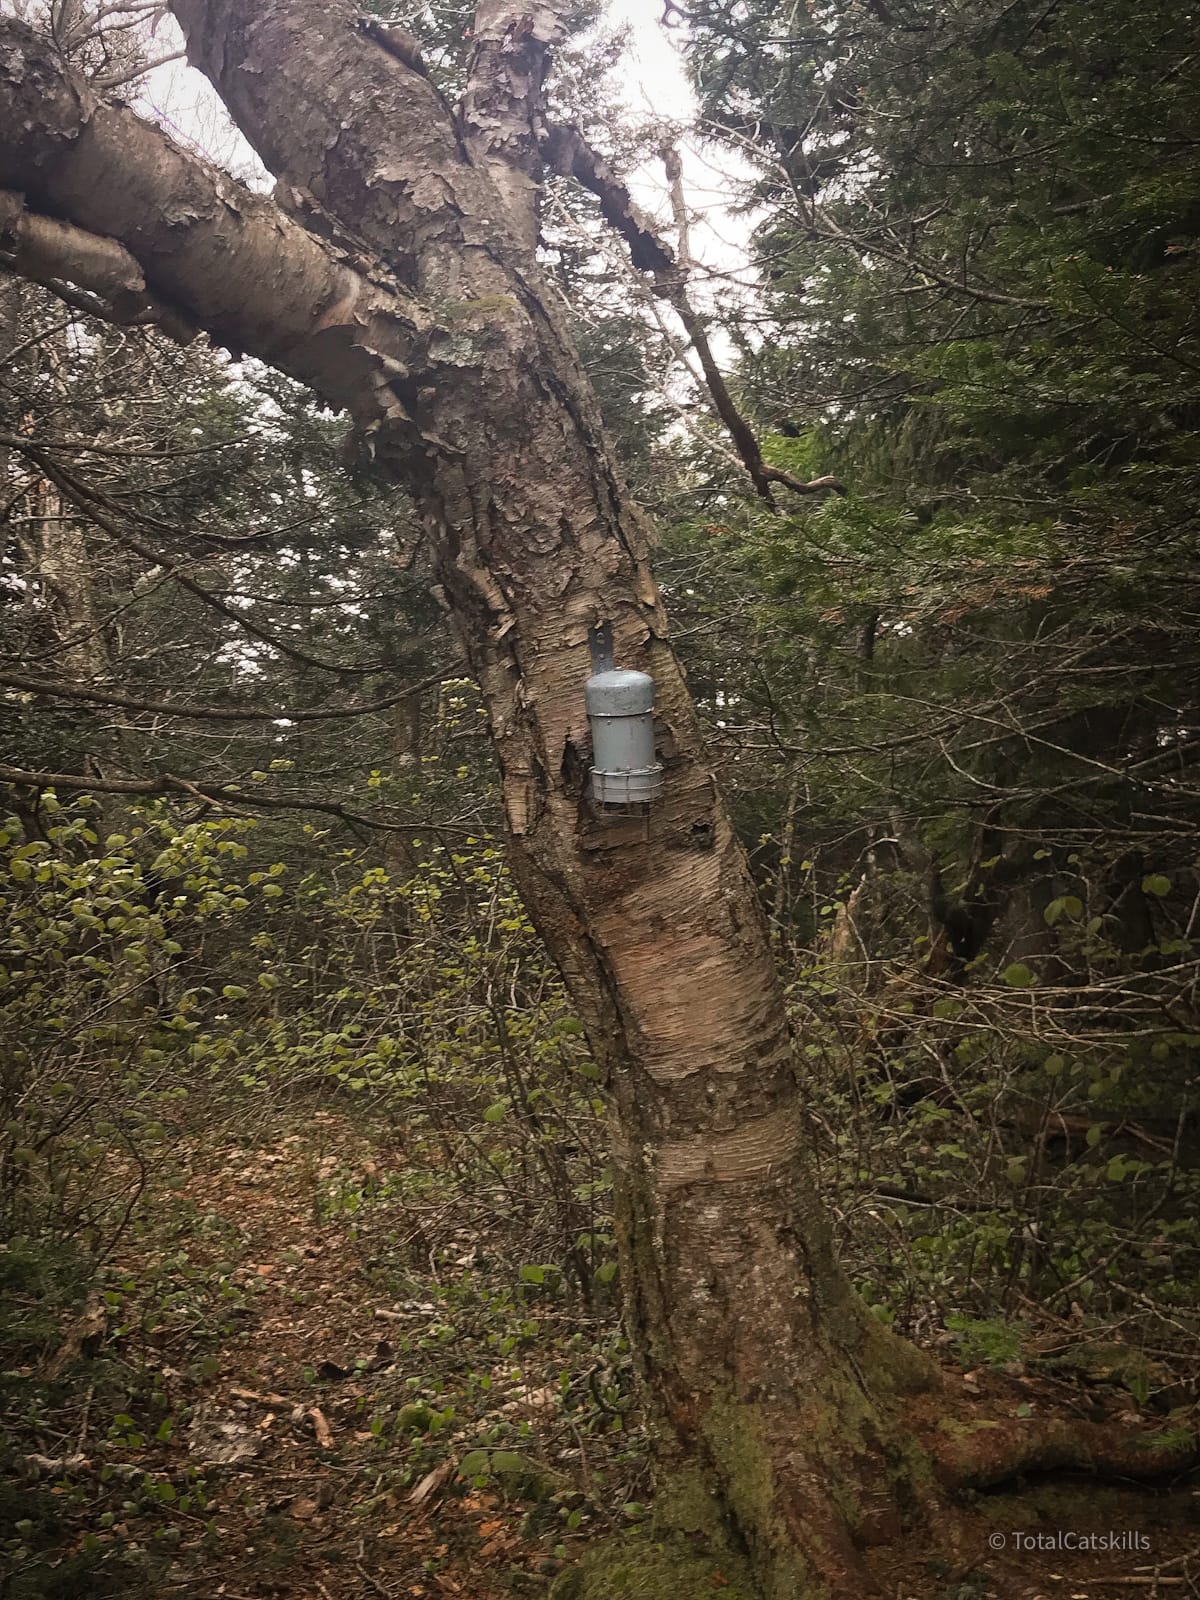 canister affixed to tree